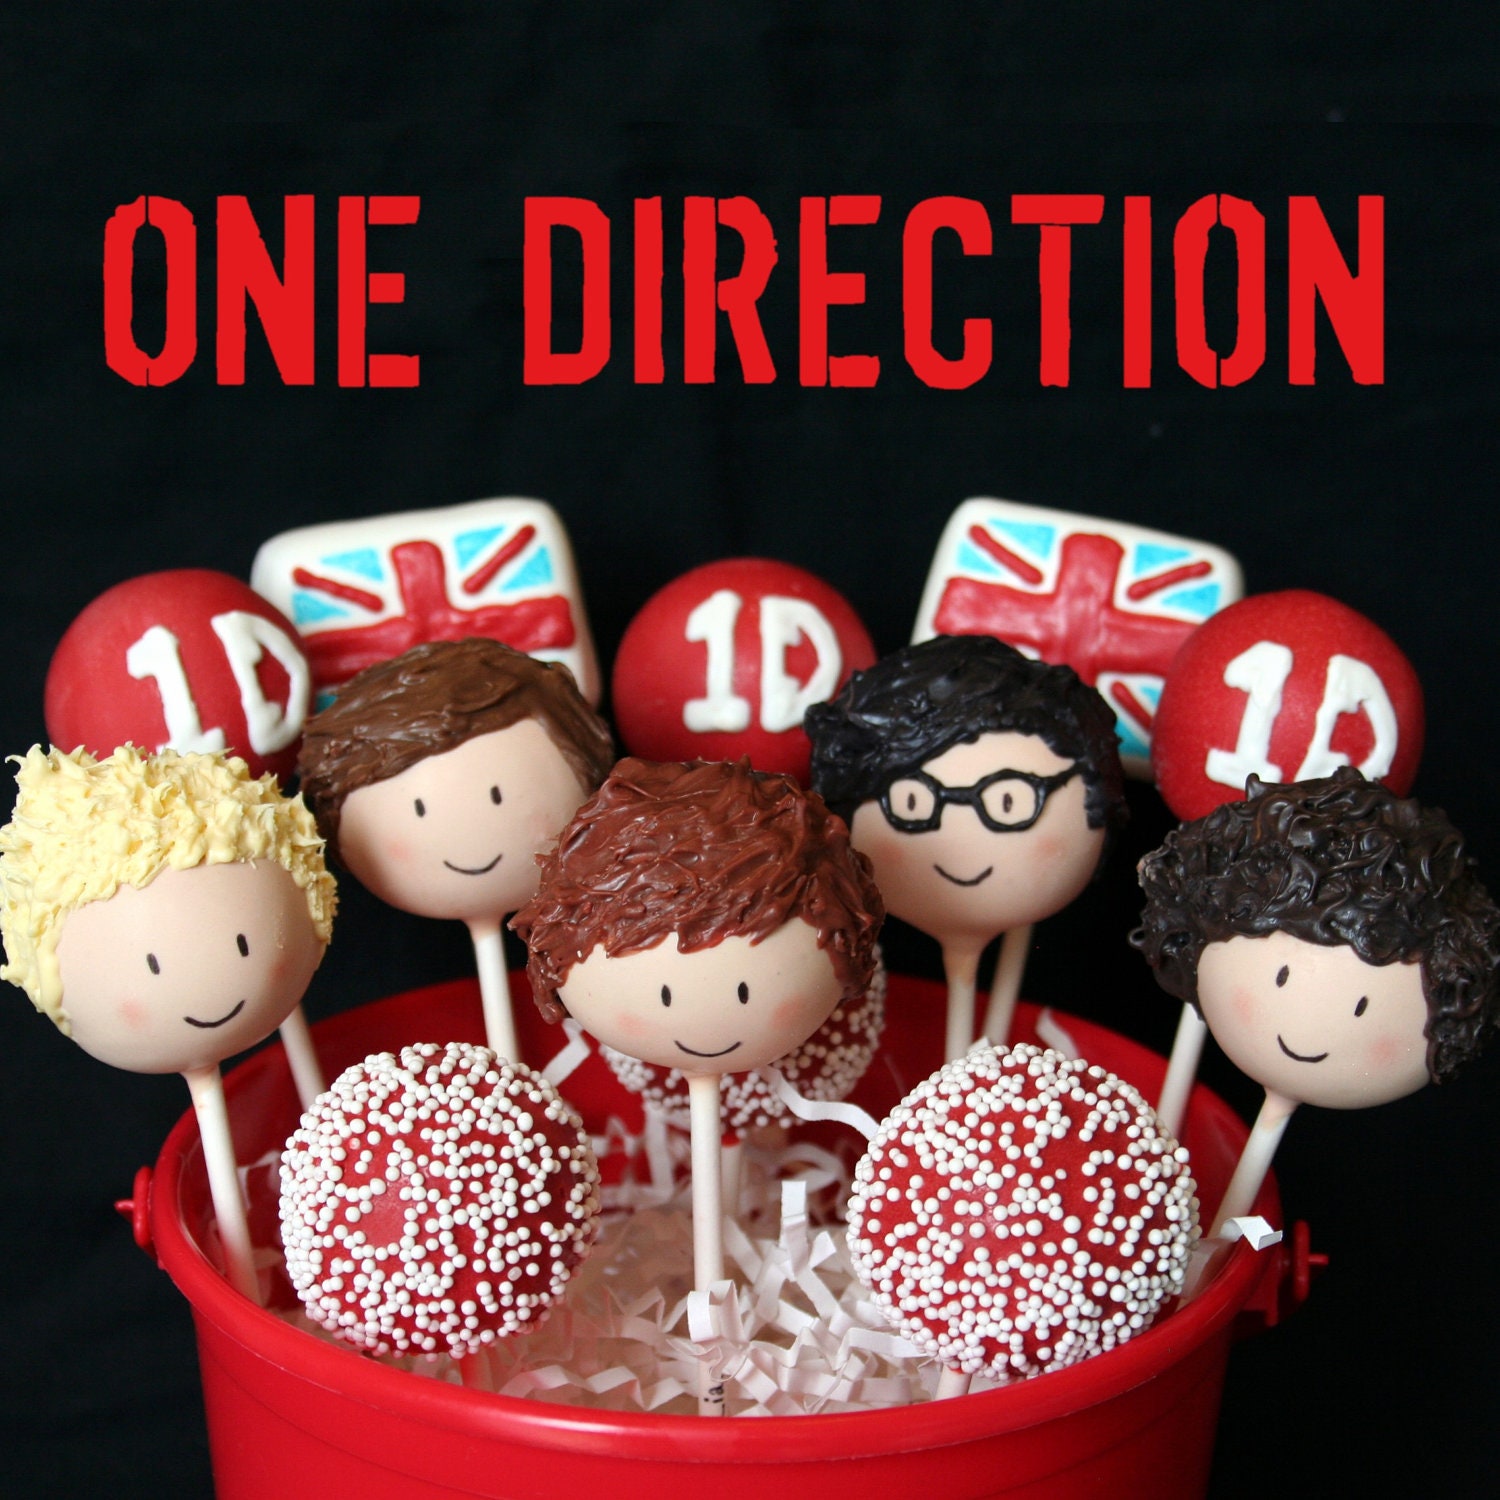 6 One Direction British Boy Band Cake Pops - for birthday, rock, pop, karaoke party favors